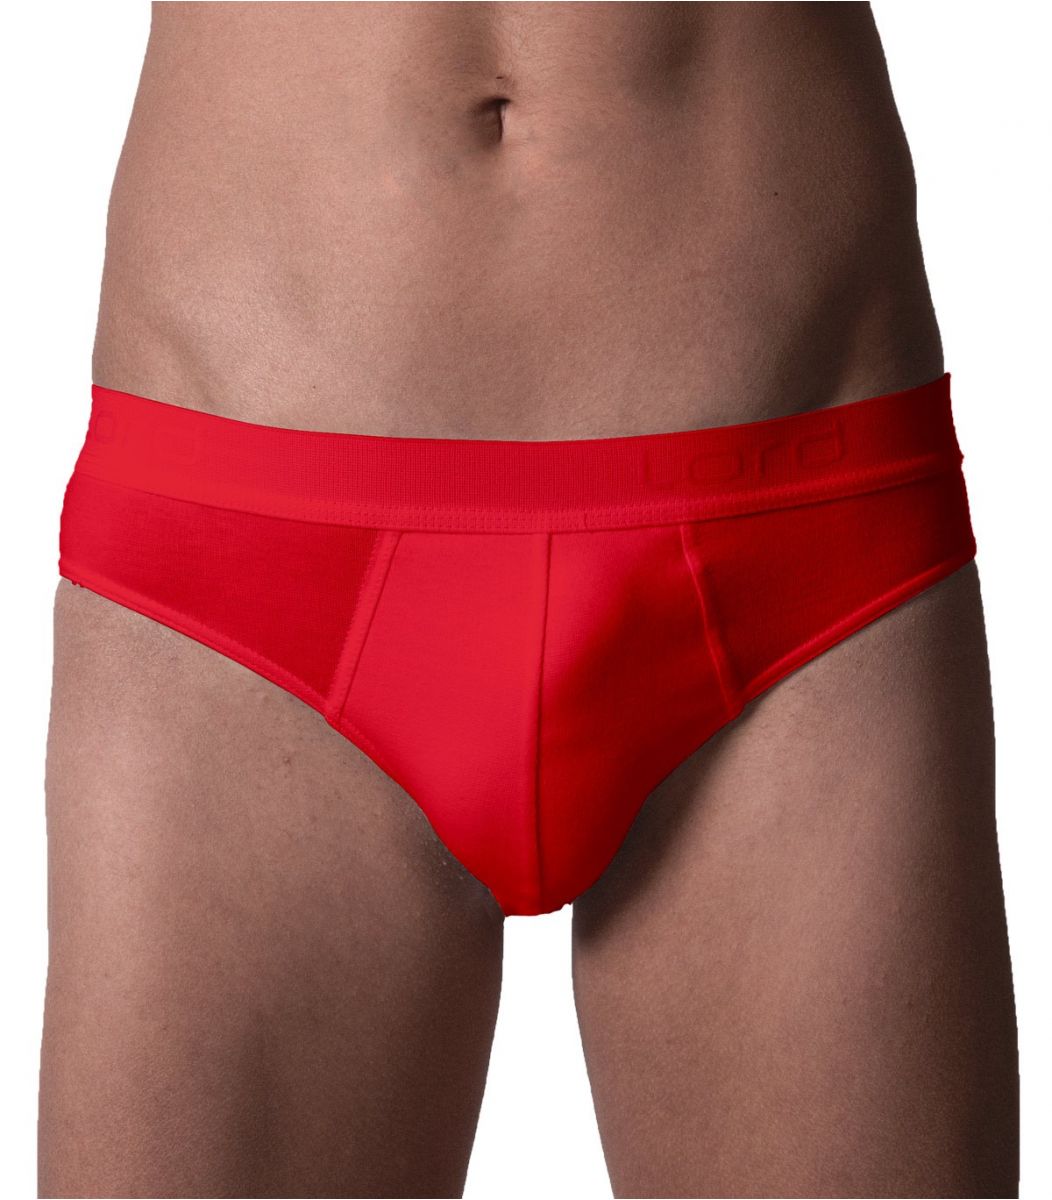  Brief Lord Brief, Ext.Rubber 1601-9